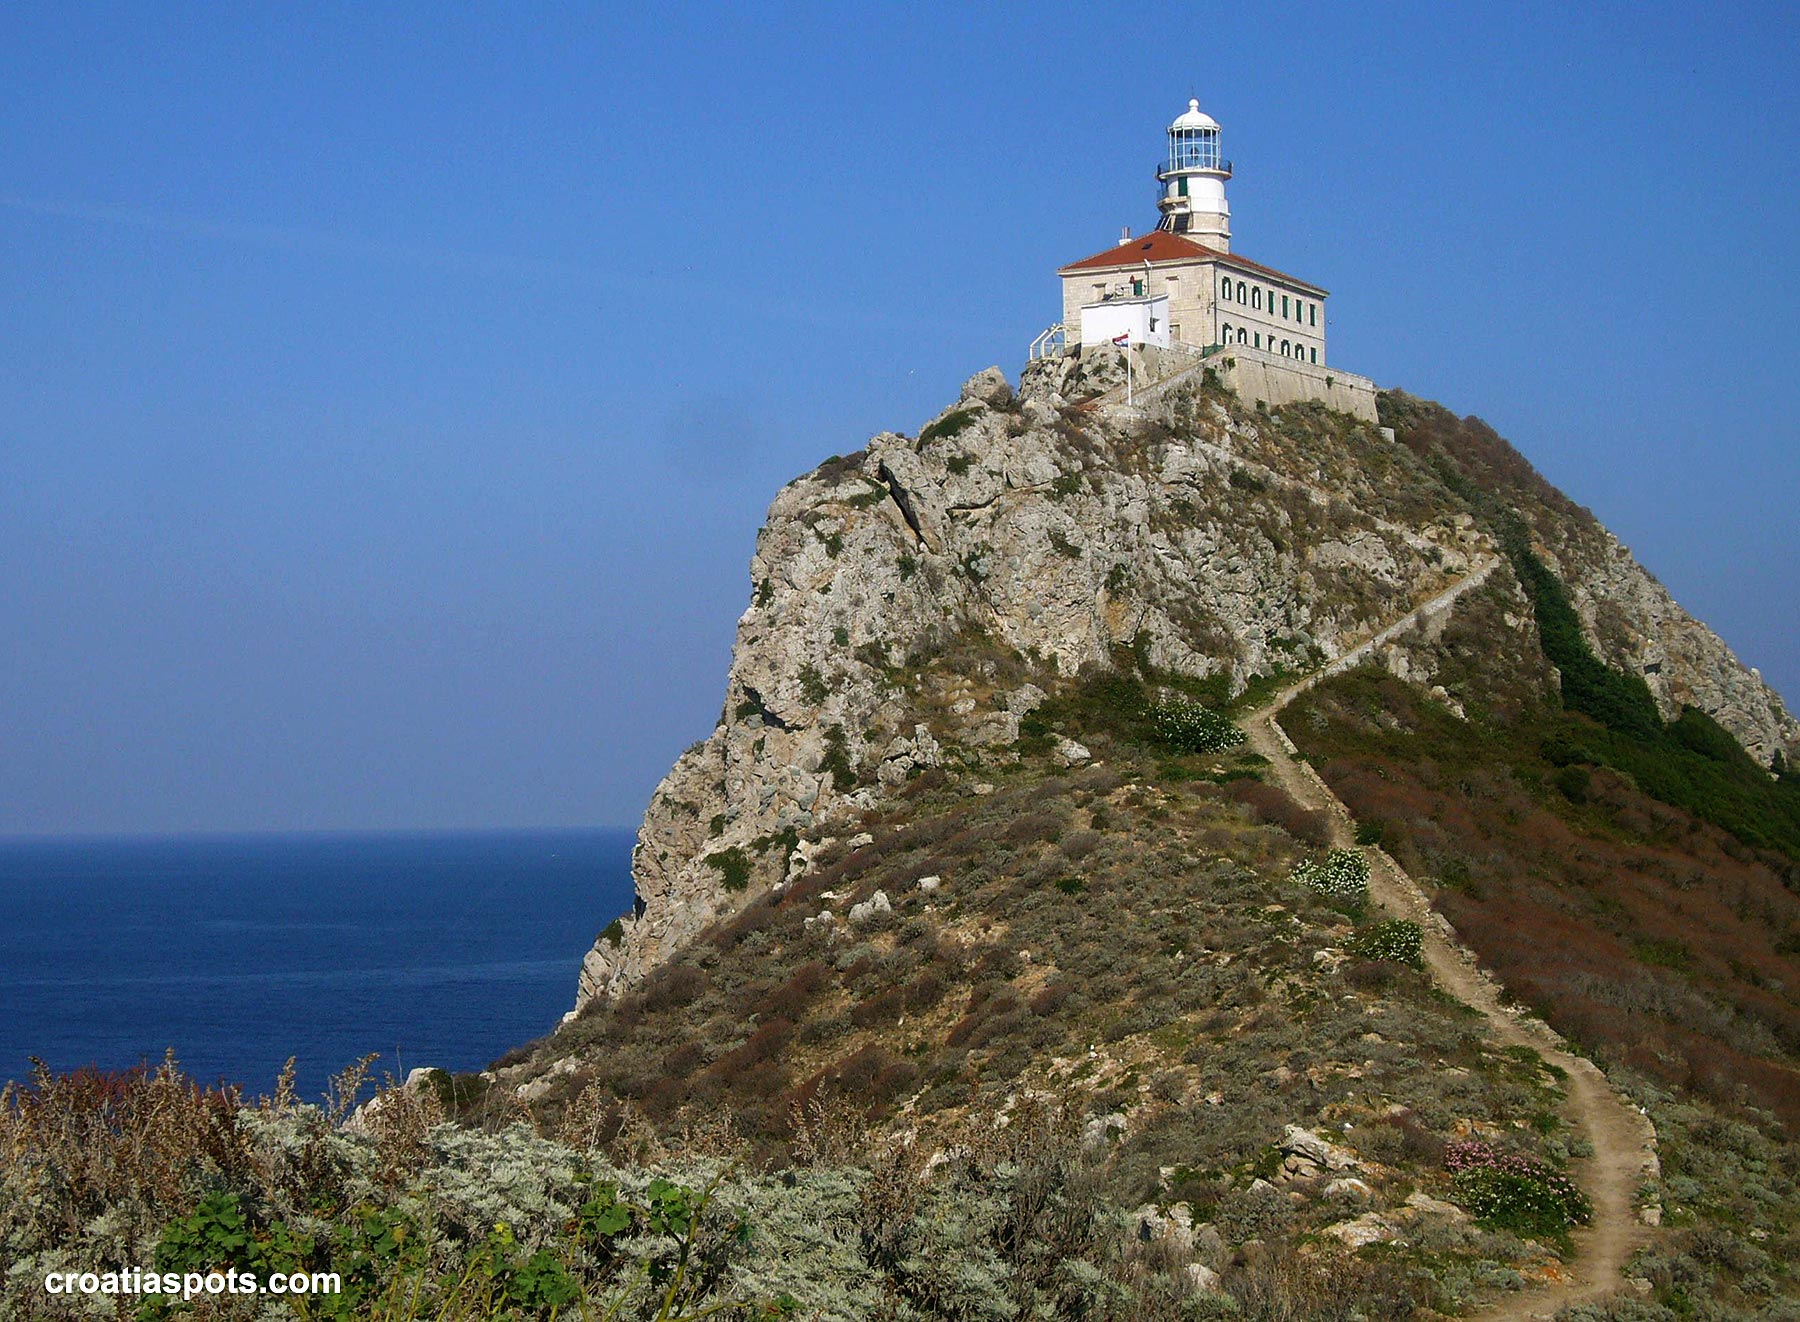 Palagruža Lighthouse on the top of the cliff